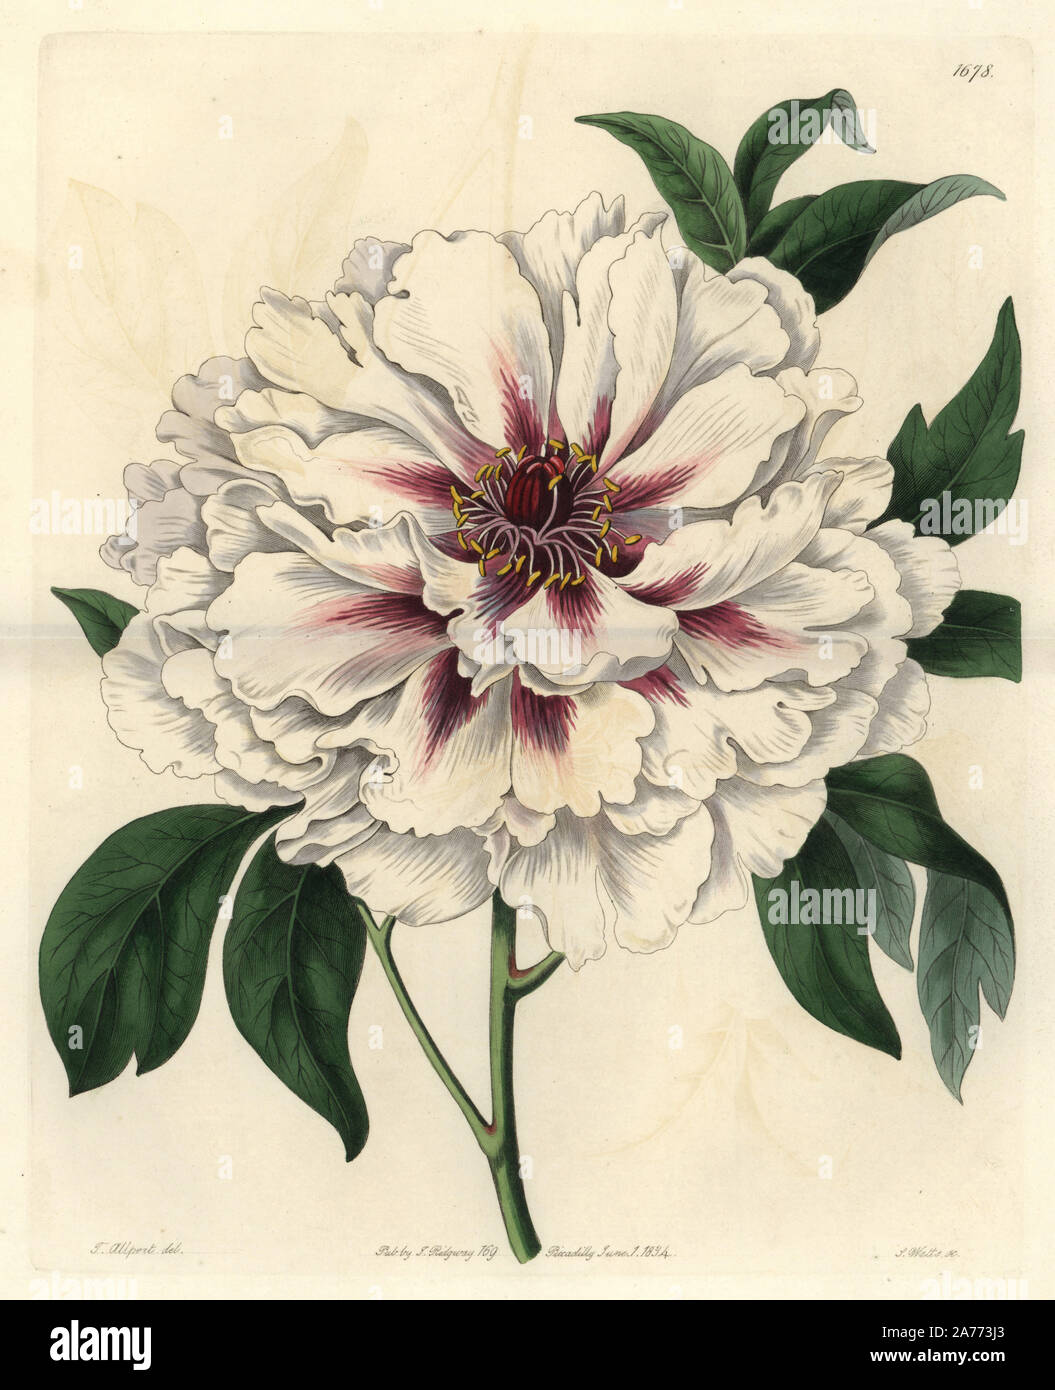 Double-white tree peony, Paeonia moutan albida plena. Handcoloured copperplate engraving by S. Watts after an illustration by Thomas Allport from Sydenham Edwards' 'The Botanical Register,' London, Ridgway, 1834. Allport (1804-1879) was a miniature painter, botanical artist, and drawing instructor. Stock Photo